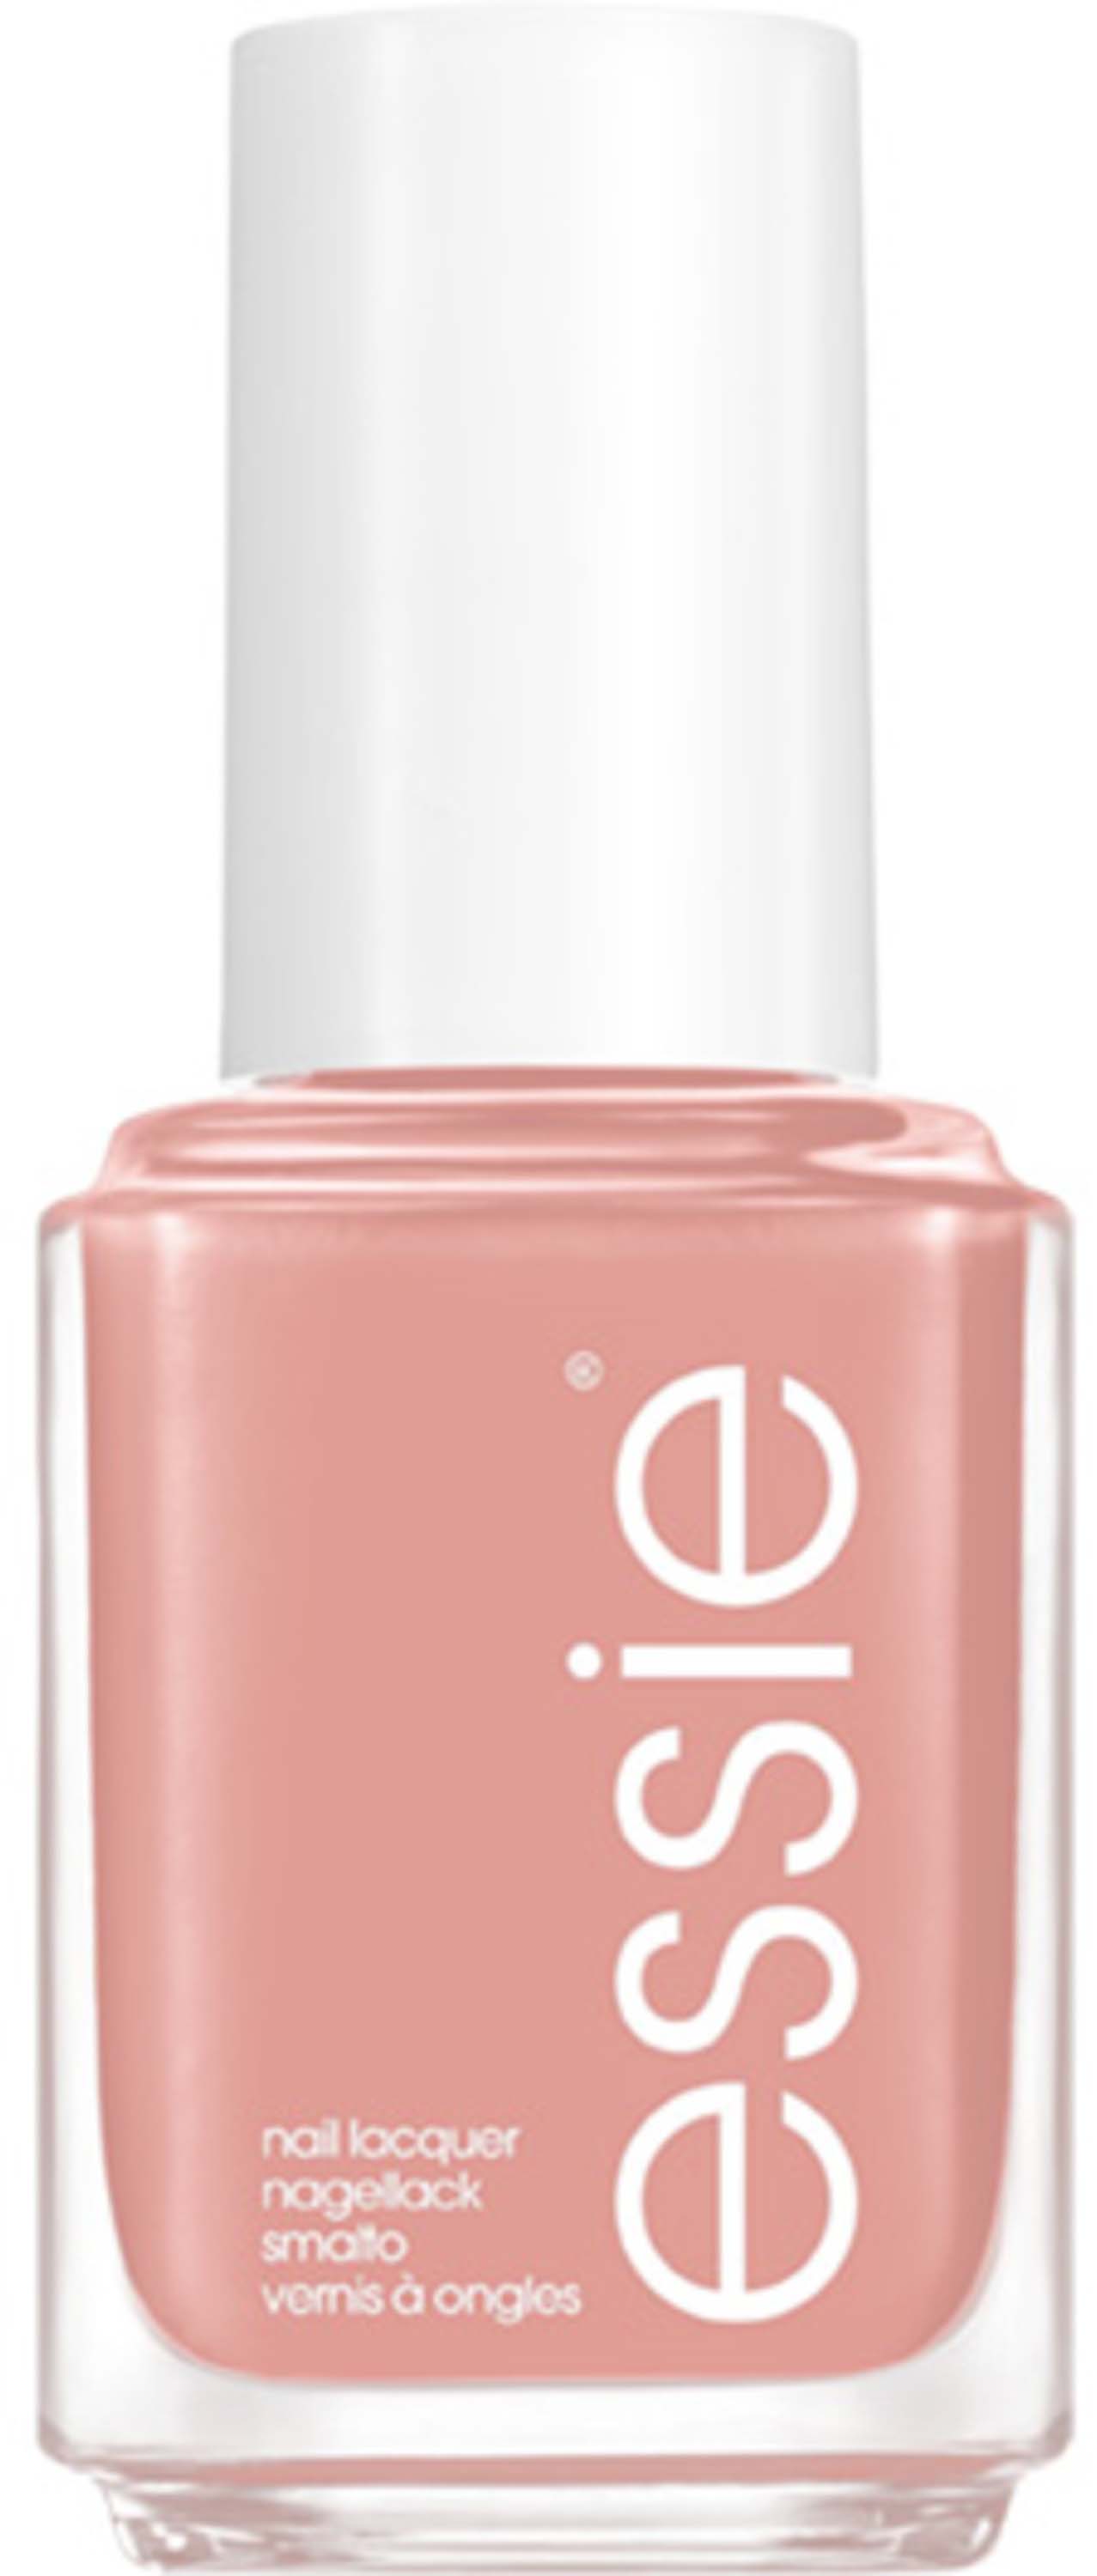 Essie not red-y for 749 Is bed Real Lacquer Snuggle Nail The collection